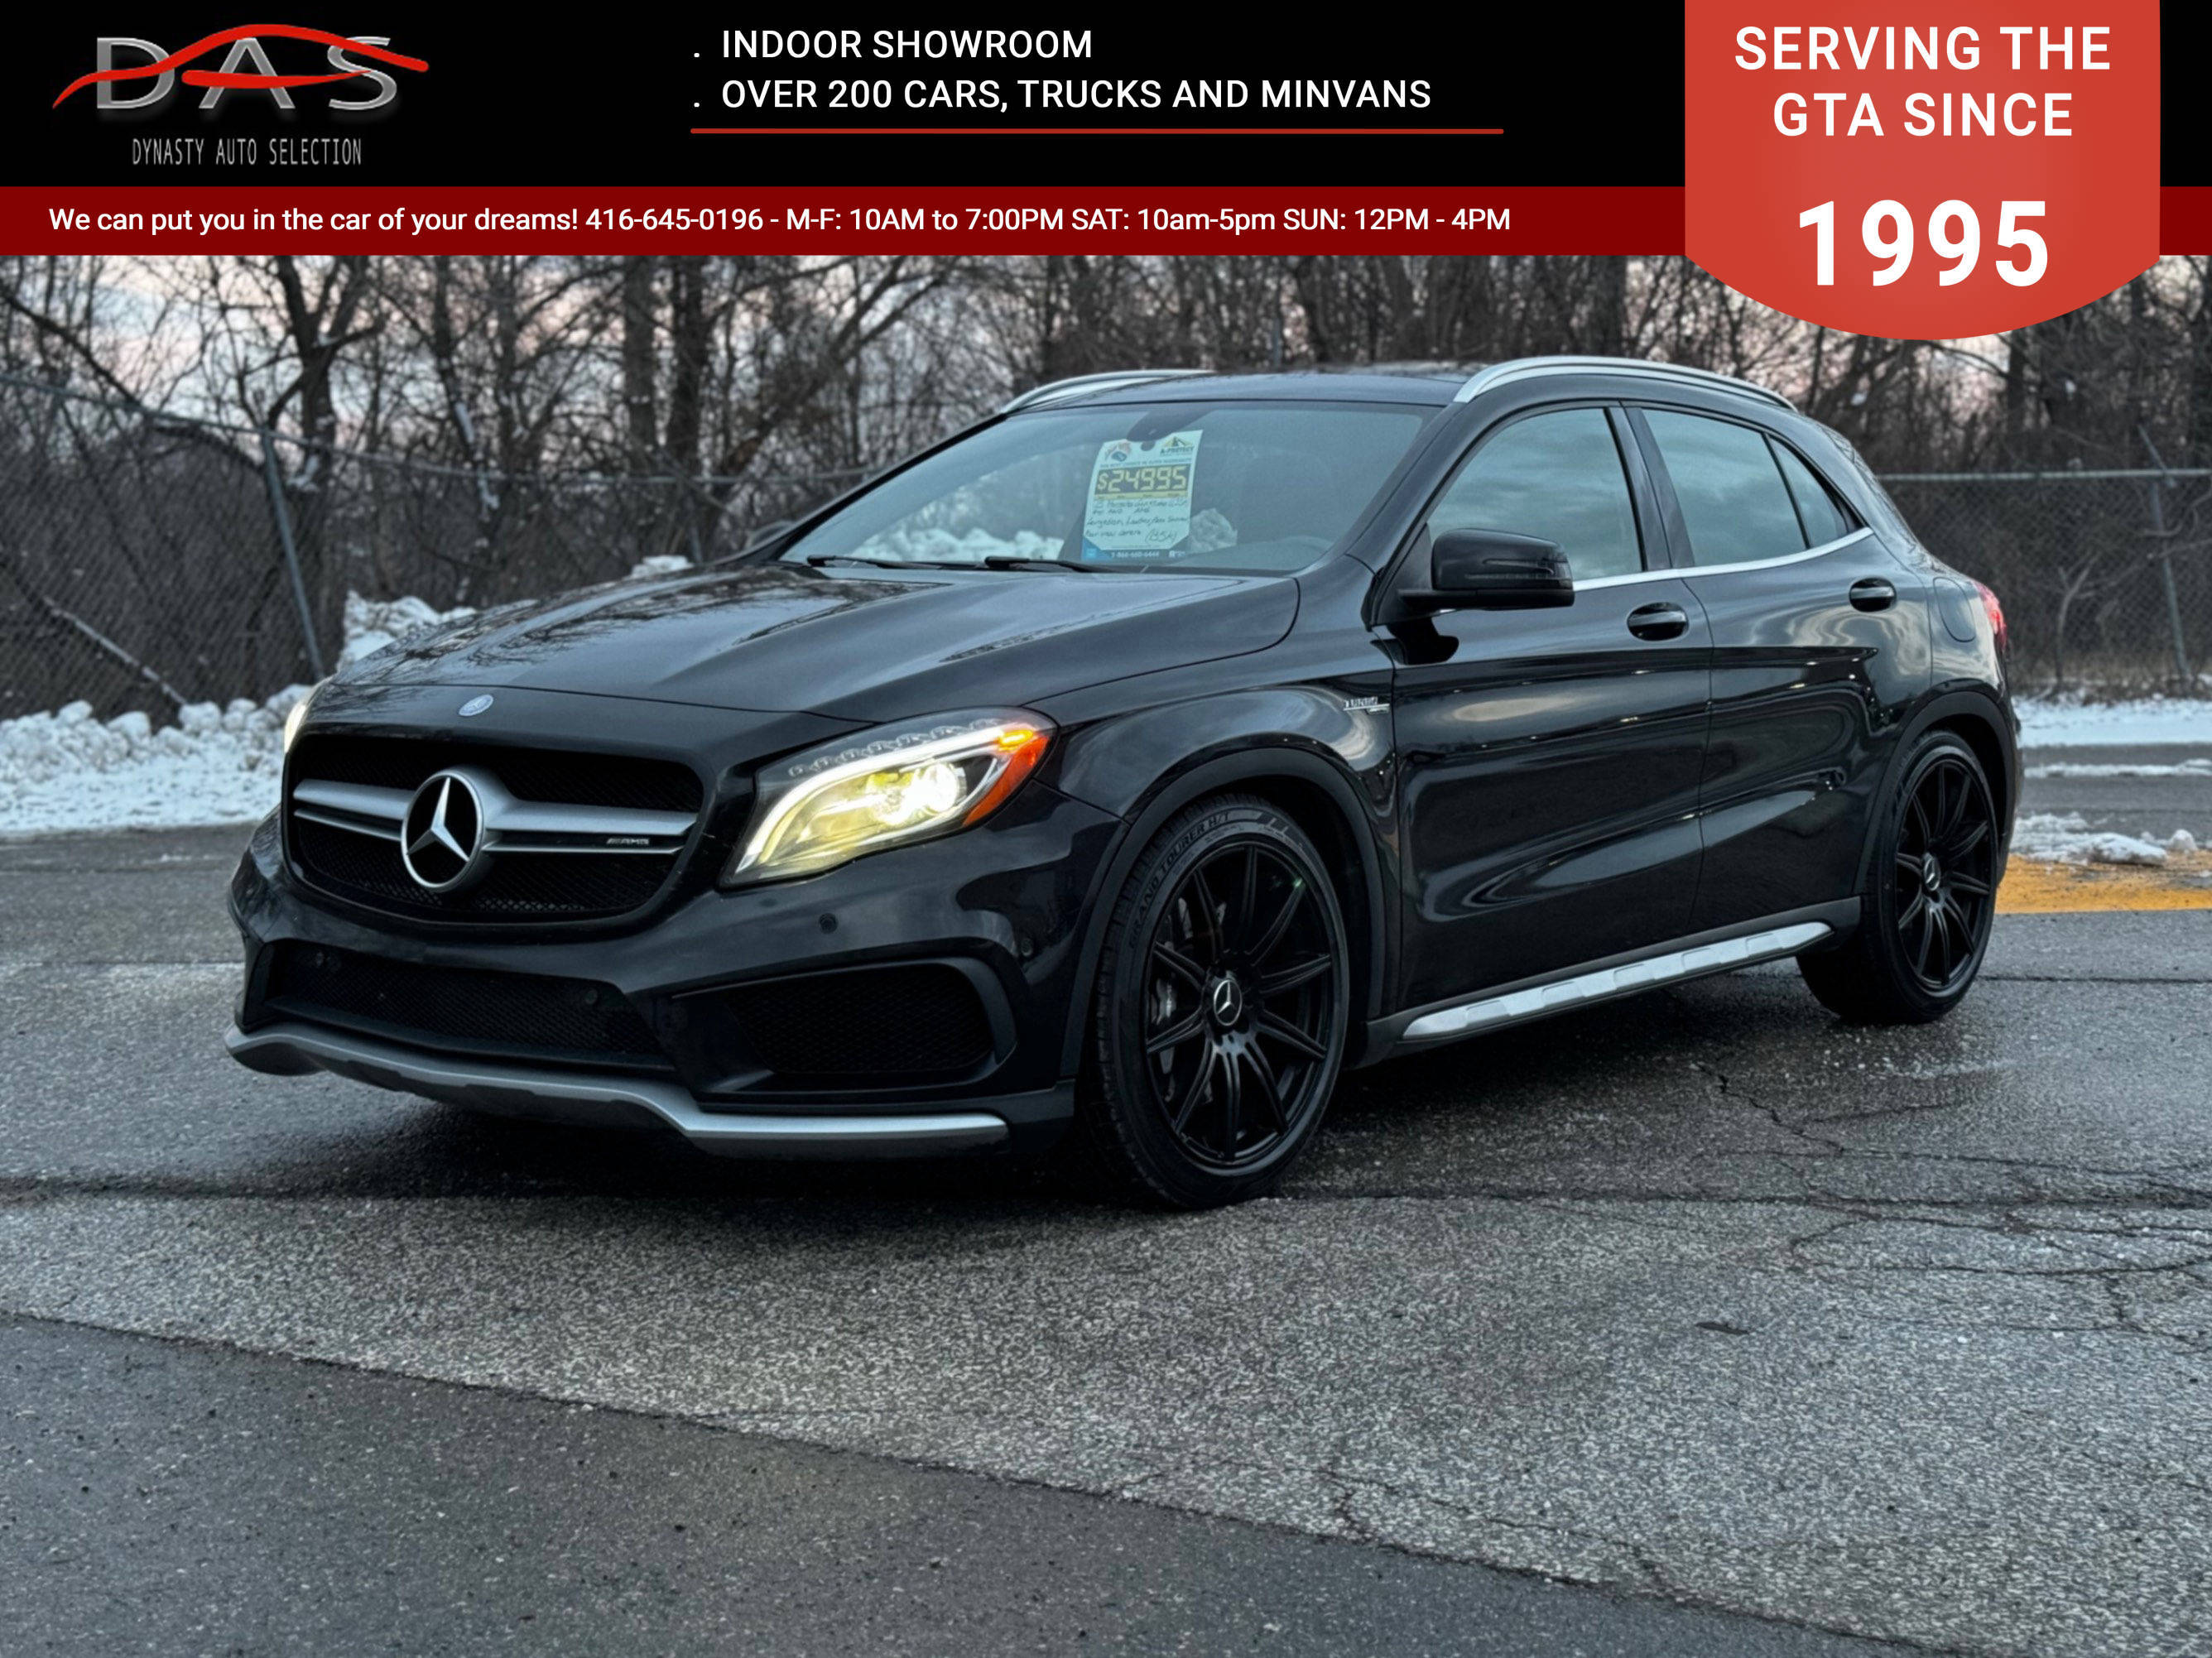 2015 Mercedes-Benz GLA-Class GLA45 AMG 4MATIC Navigation/Panoramic Sunroof/Came